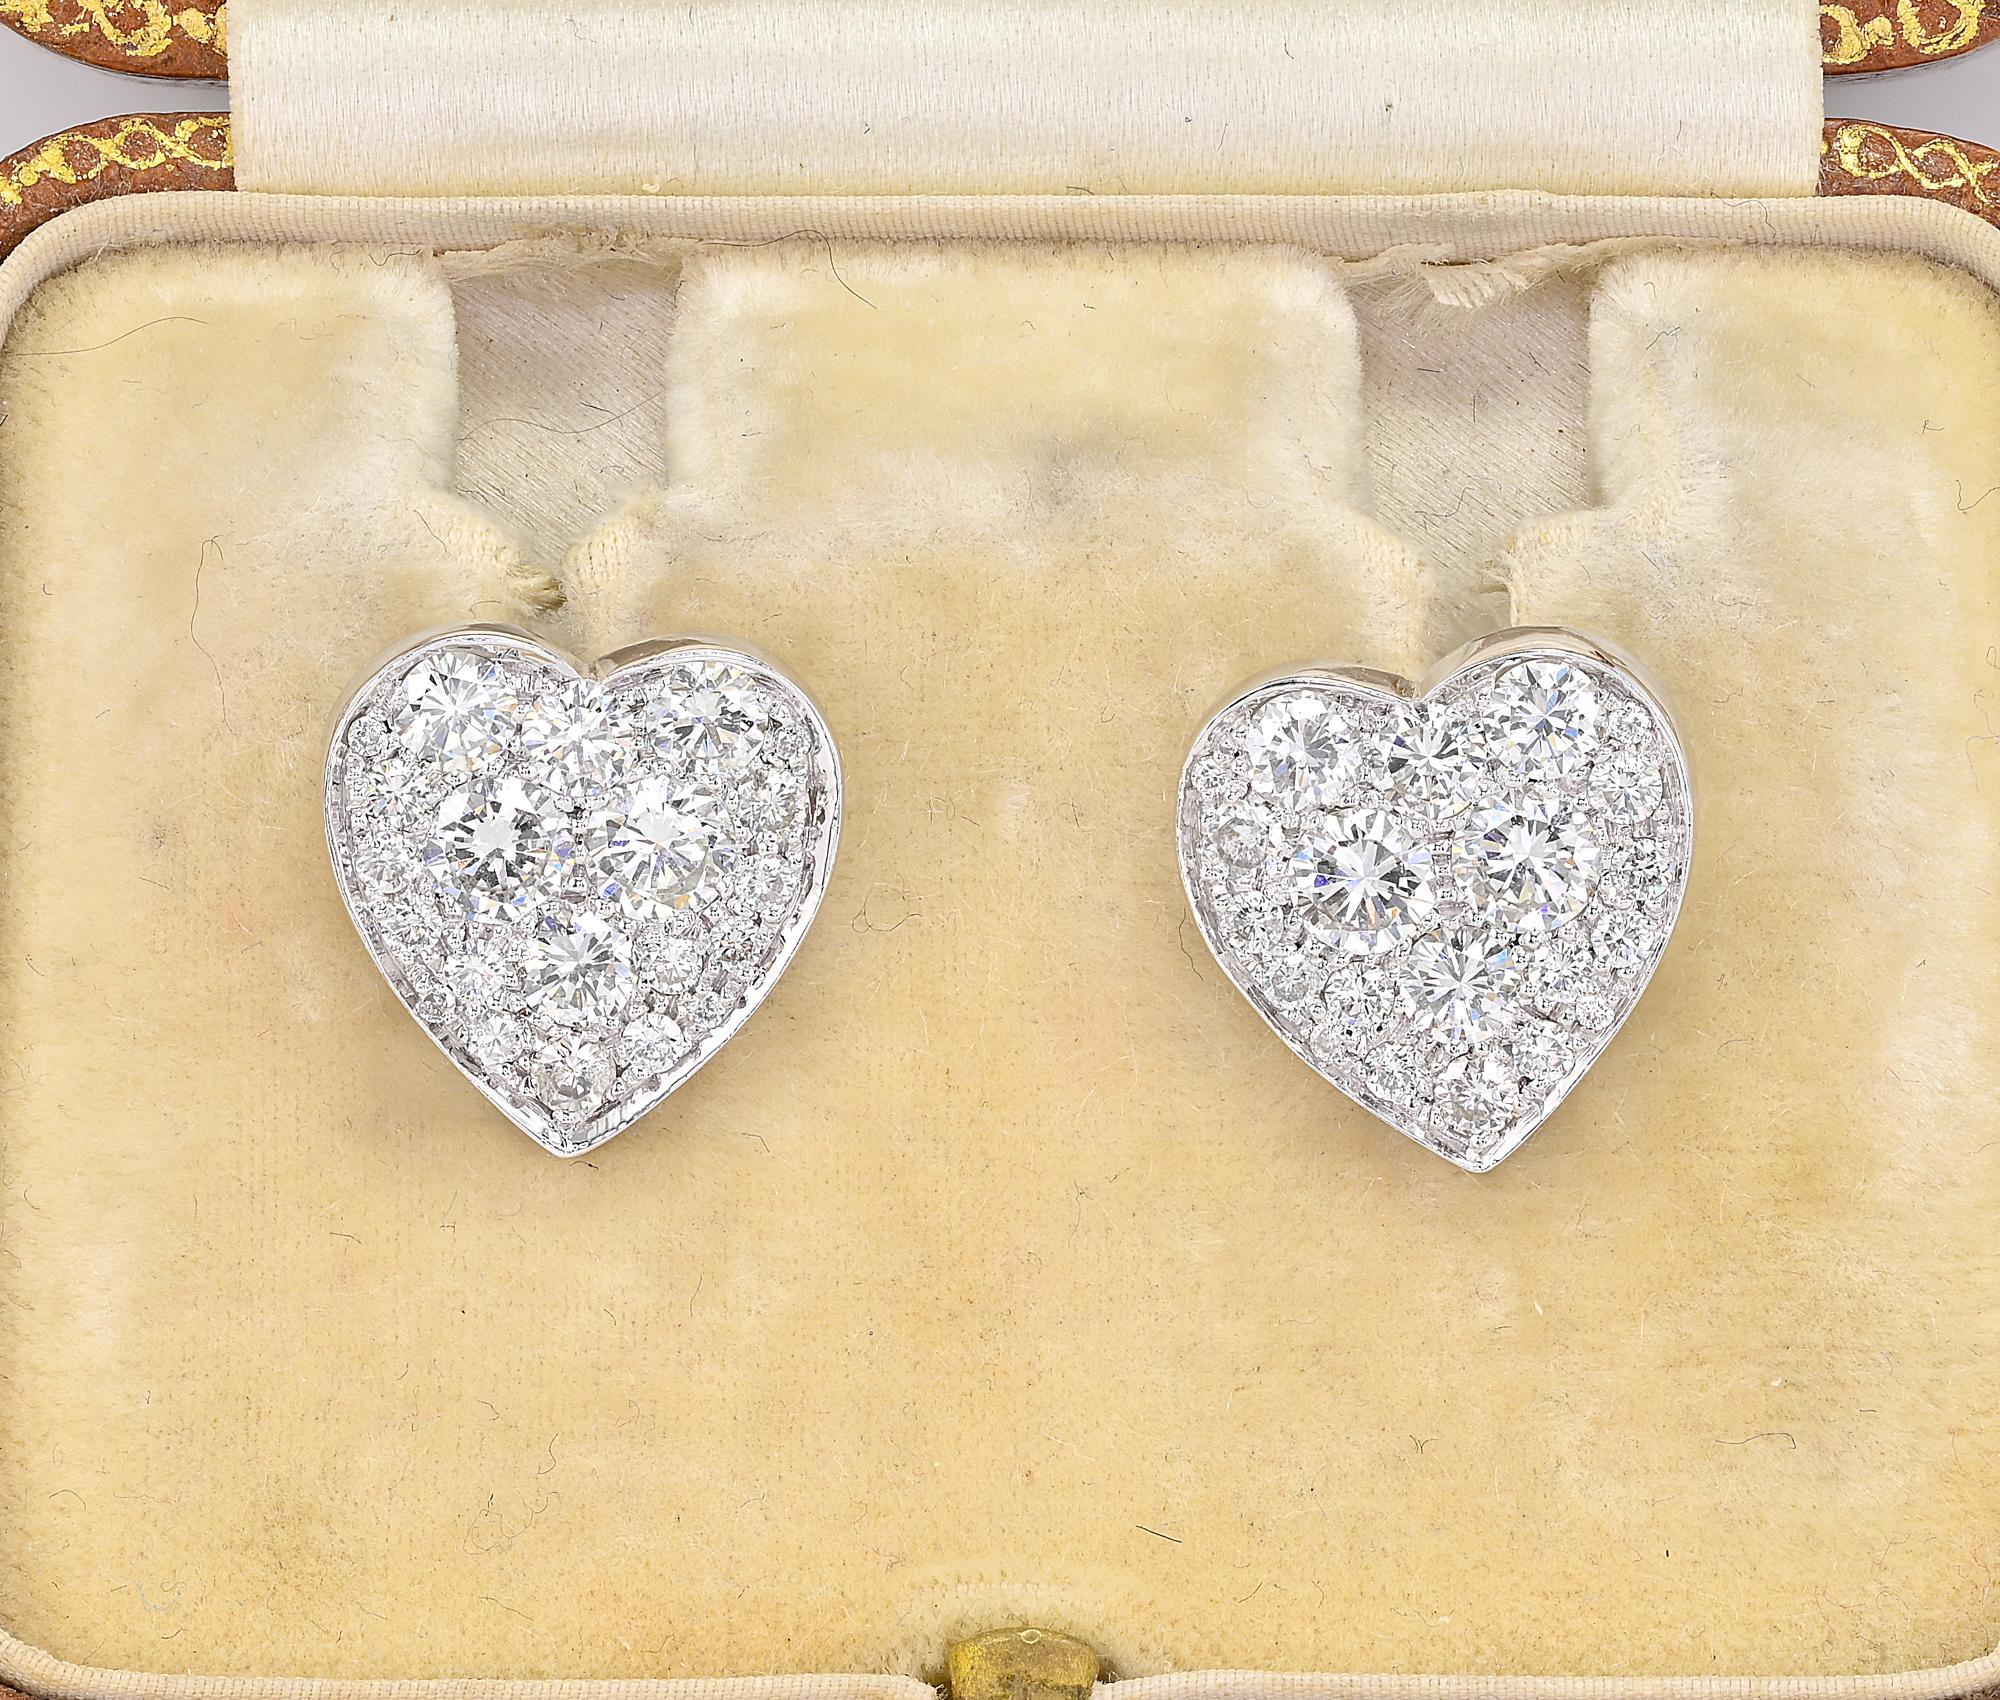 Beautiful Diamond heart stud earrings hand crafted of solid 18 KT white god
Italian origin, signed Natan
Classy ever charming heart shape exalted by pavè set Diamonds with larger disposed in the middle
1.80 Ct of brilliant cut Diamonds assessed F/G